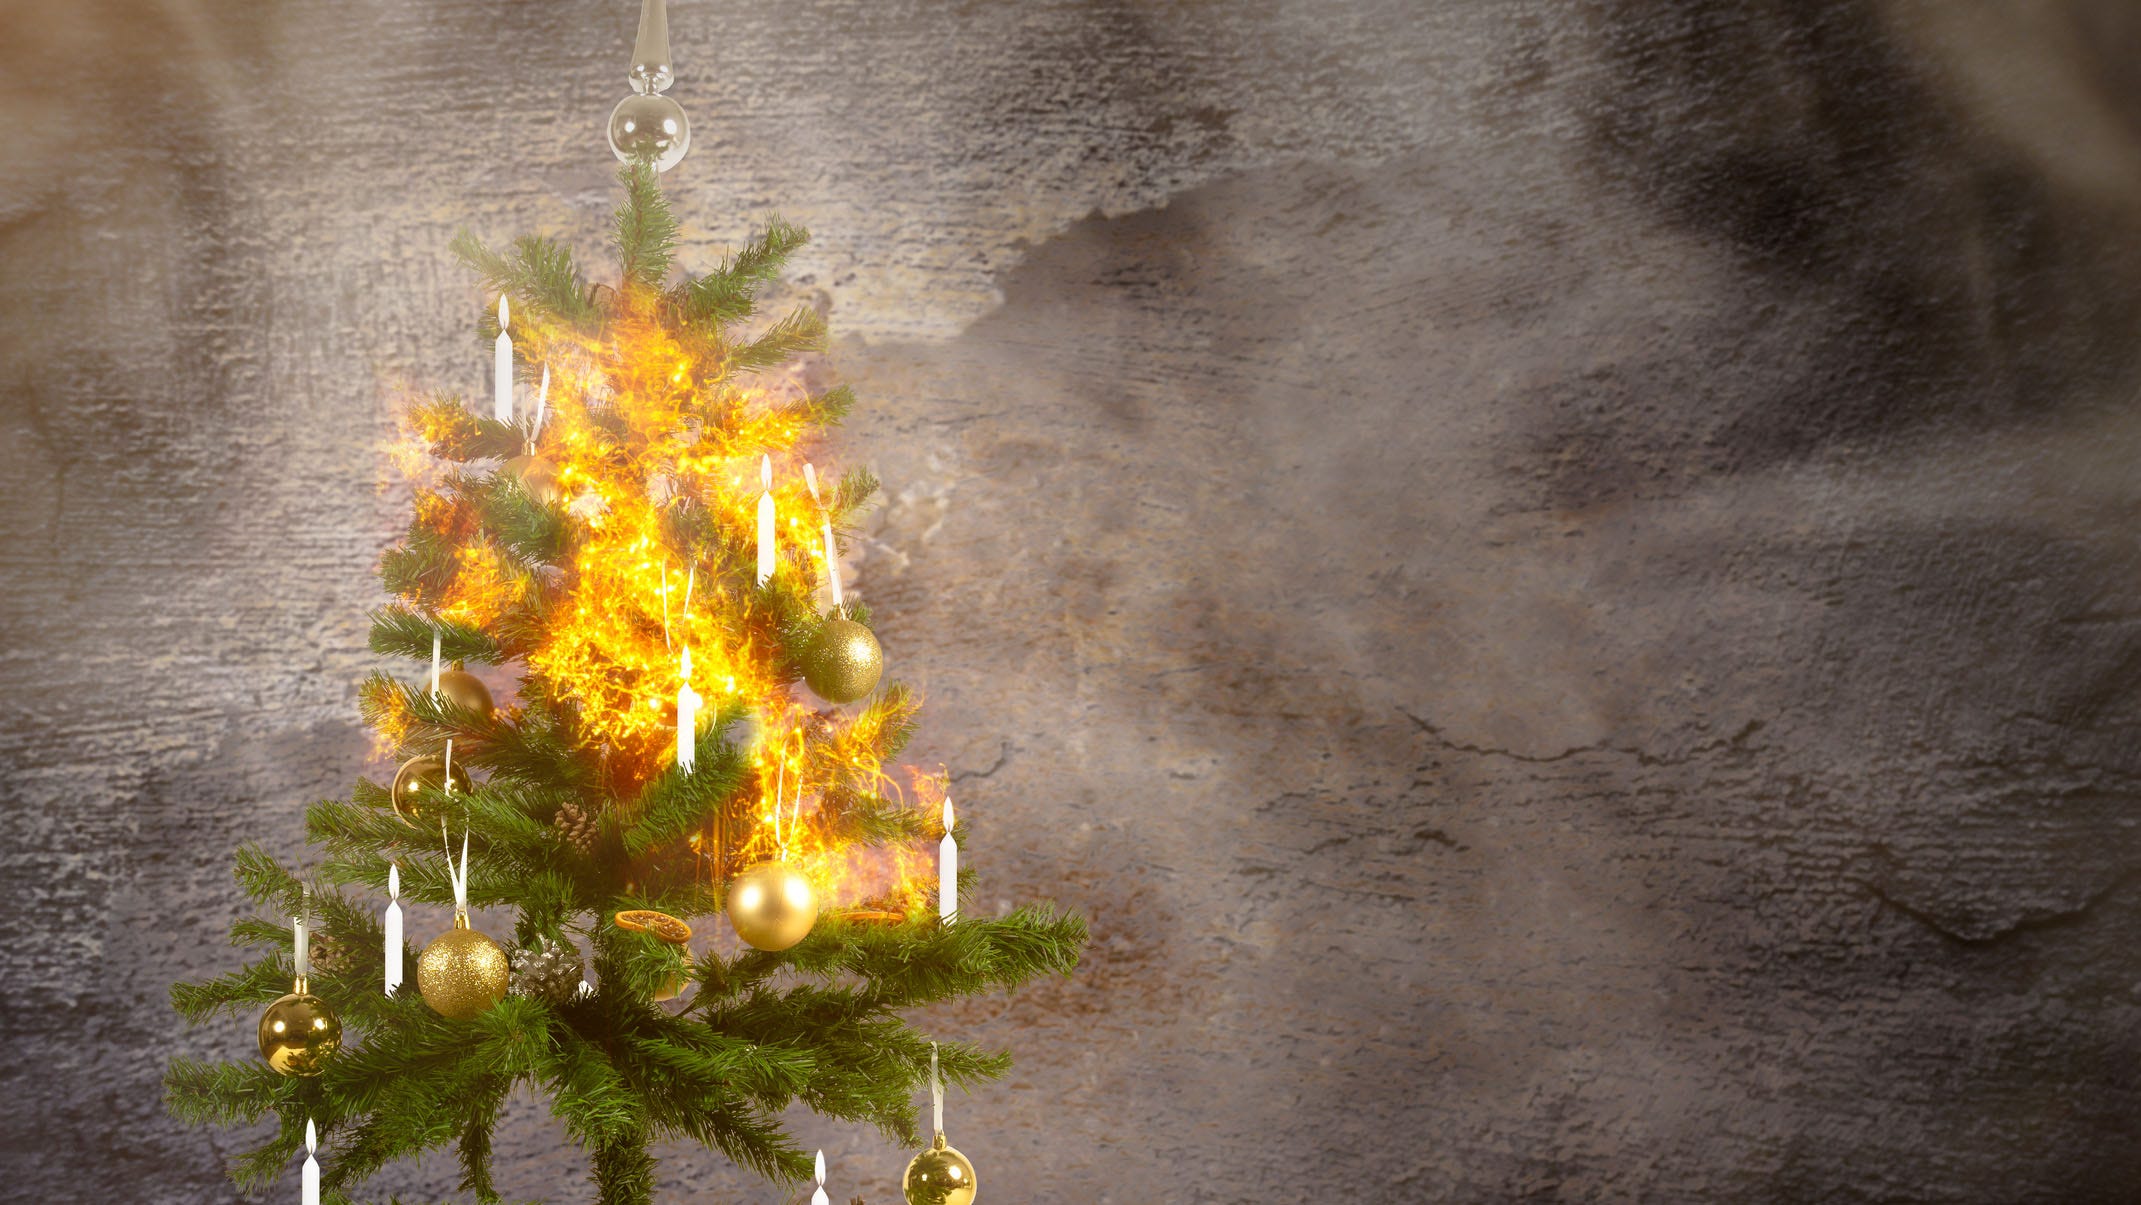 Preventing Christmas decoration fires can stop millions in property damage every year